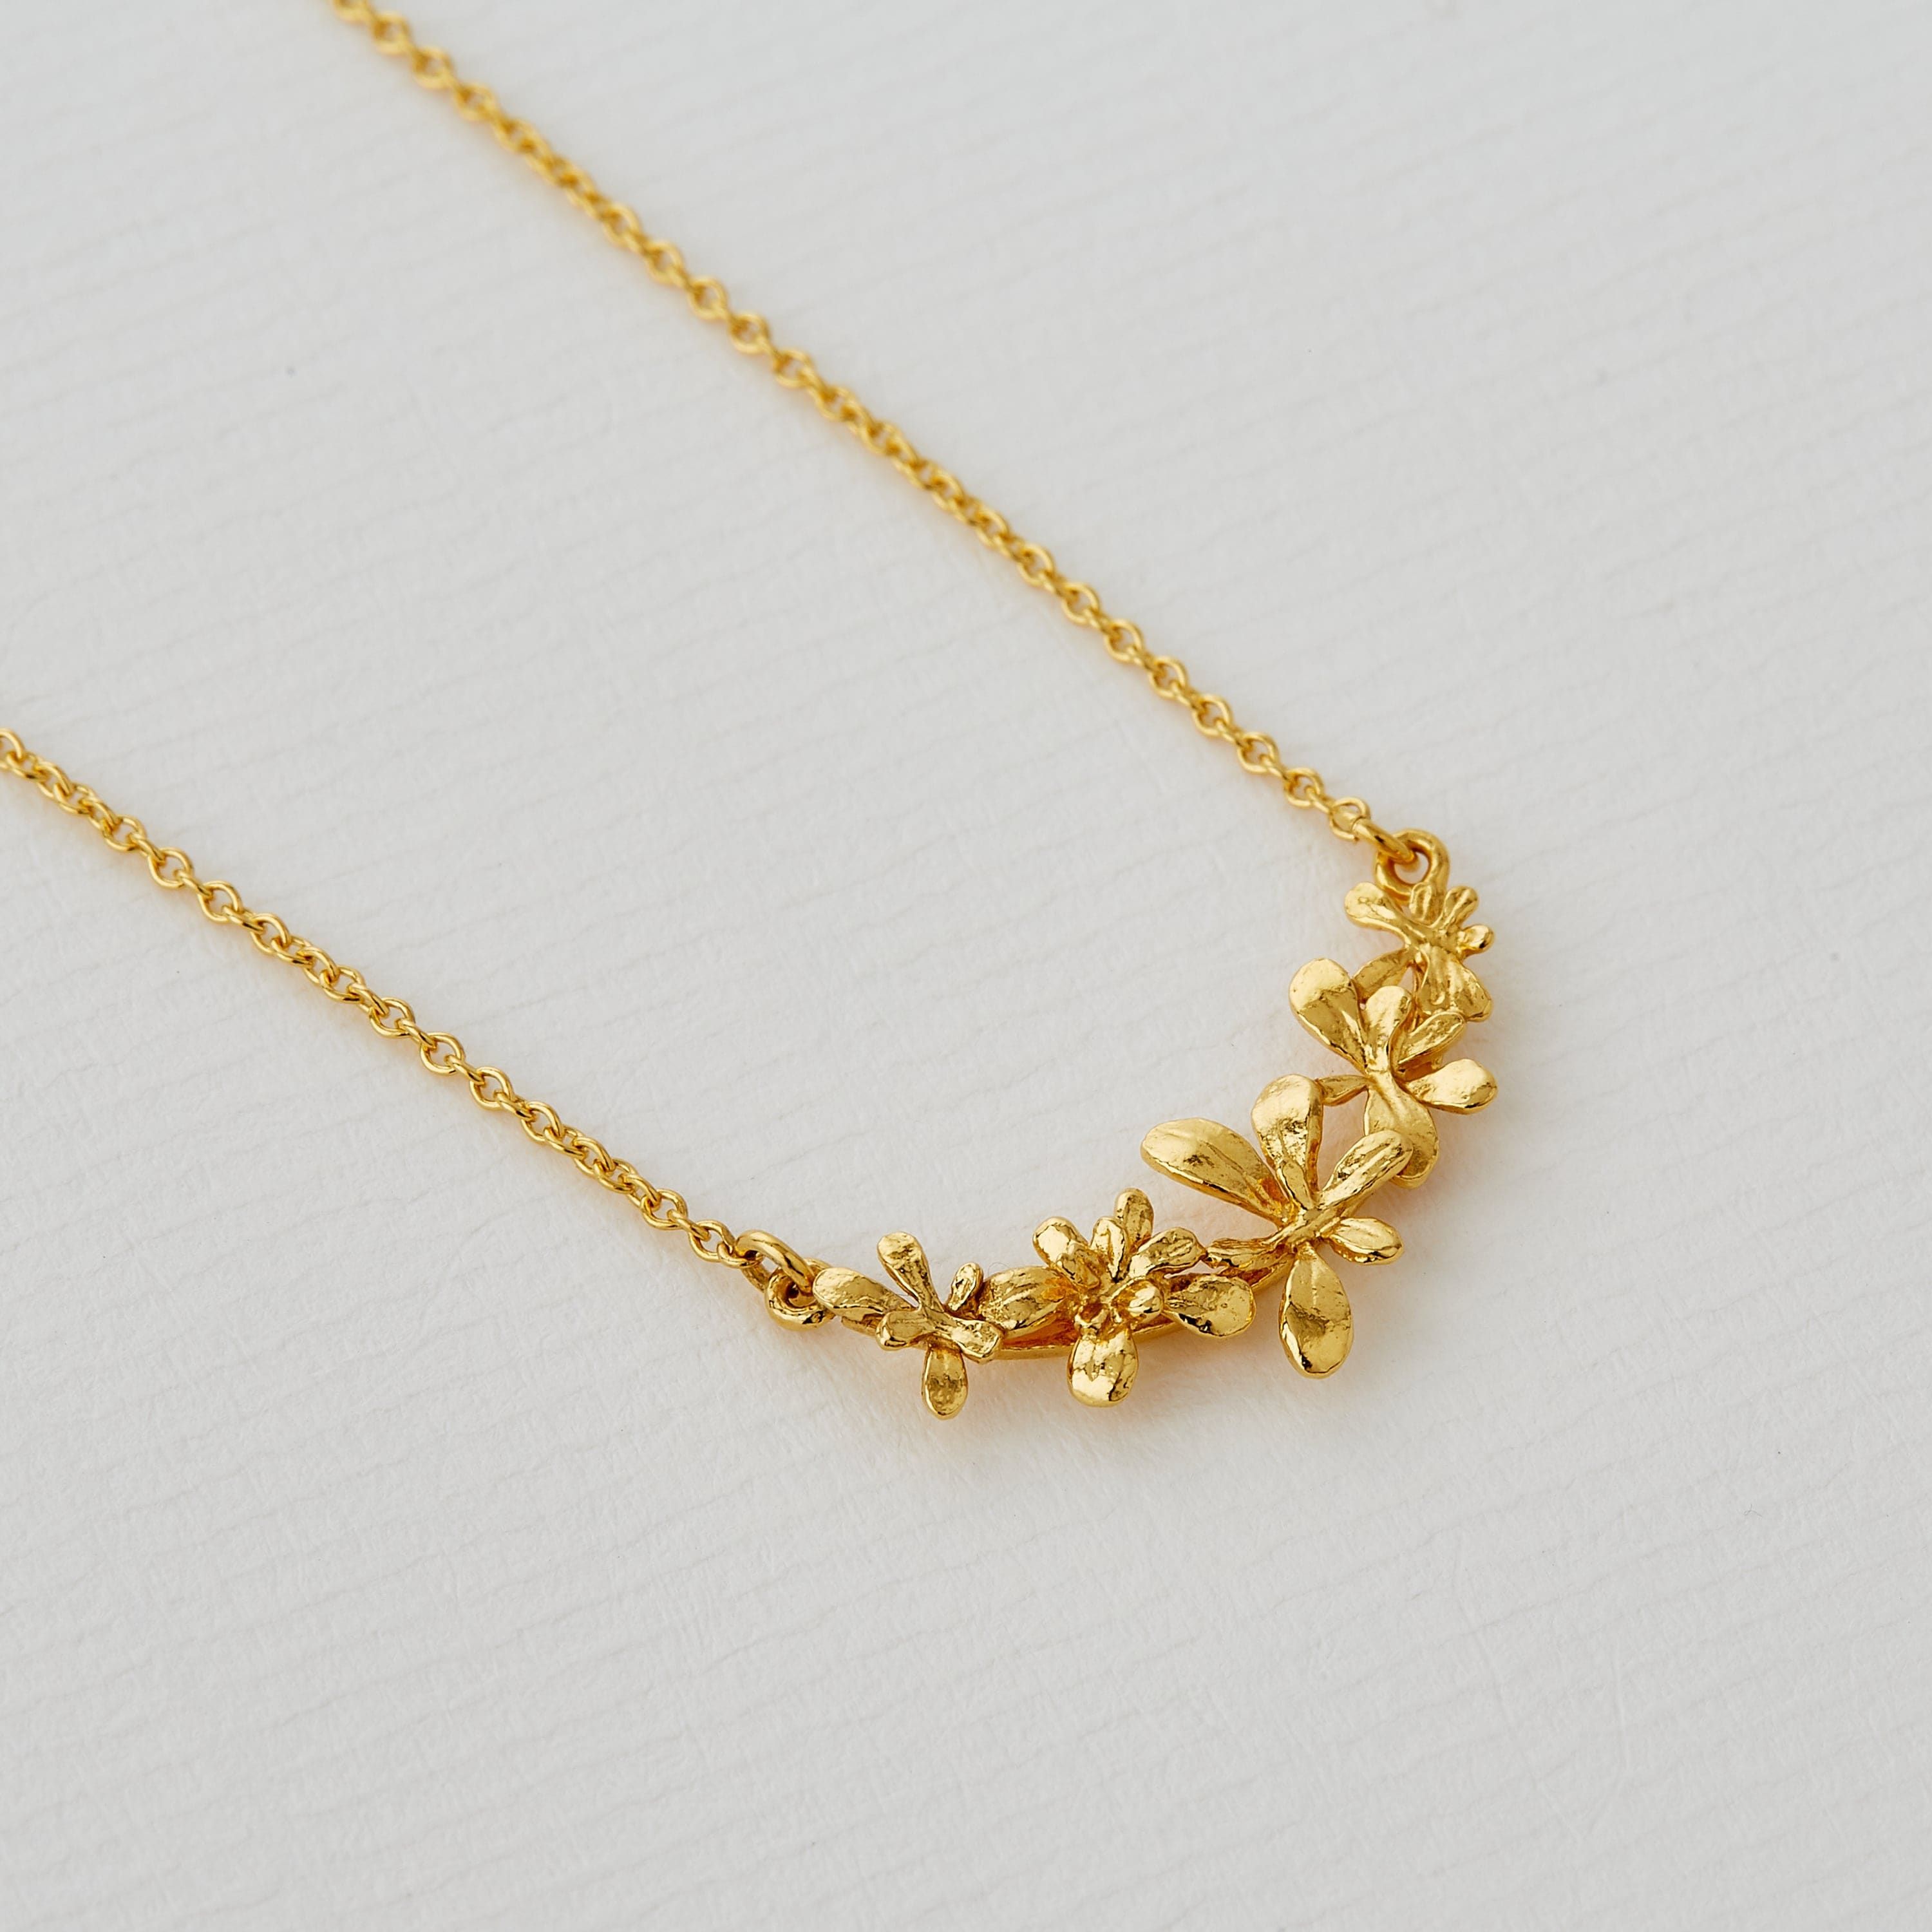 Alex Monroe Necklace | Small & Sweet Cherry Necklace Gold Plated – EC One